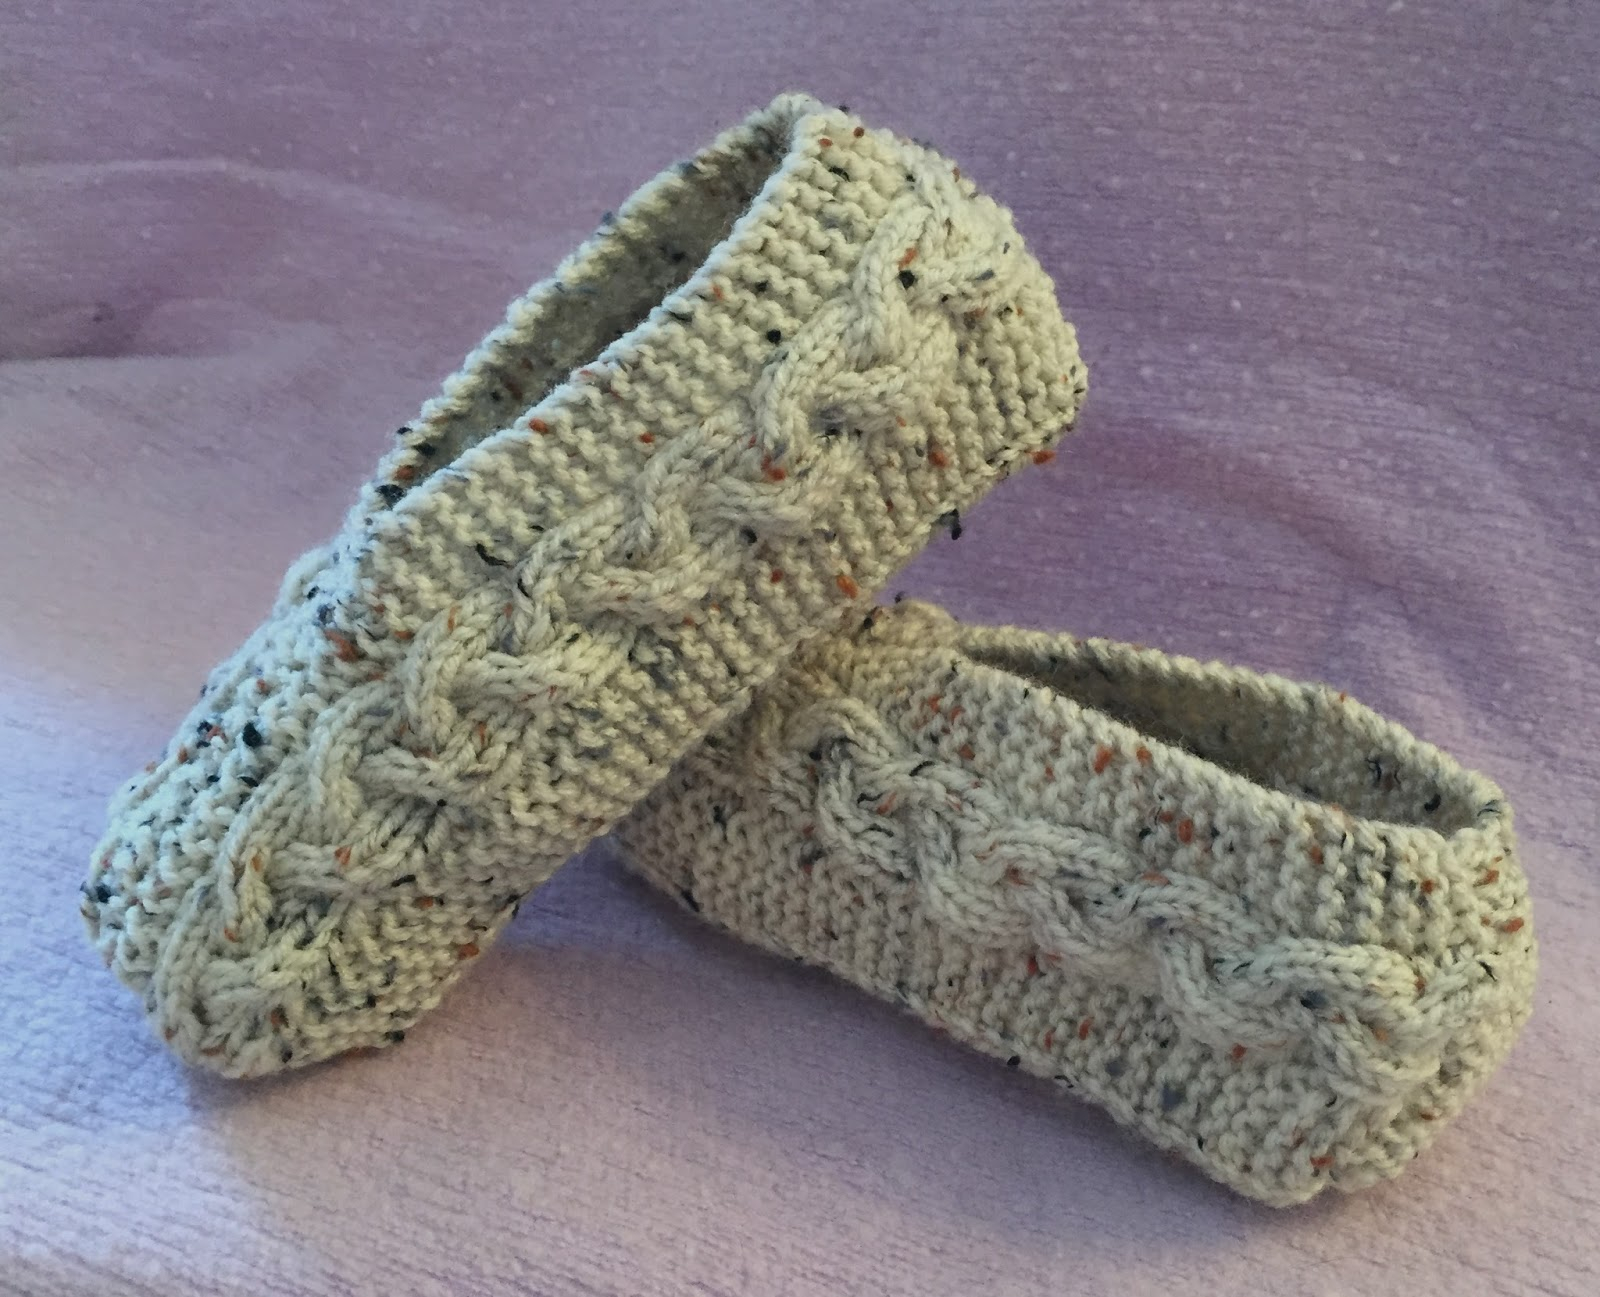 Free Patterns For Knitted Slippers Kweenbee And Me Learn To Knit Slippers With These Patterns